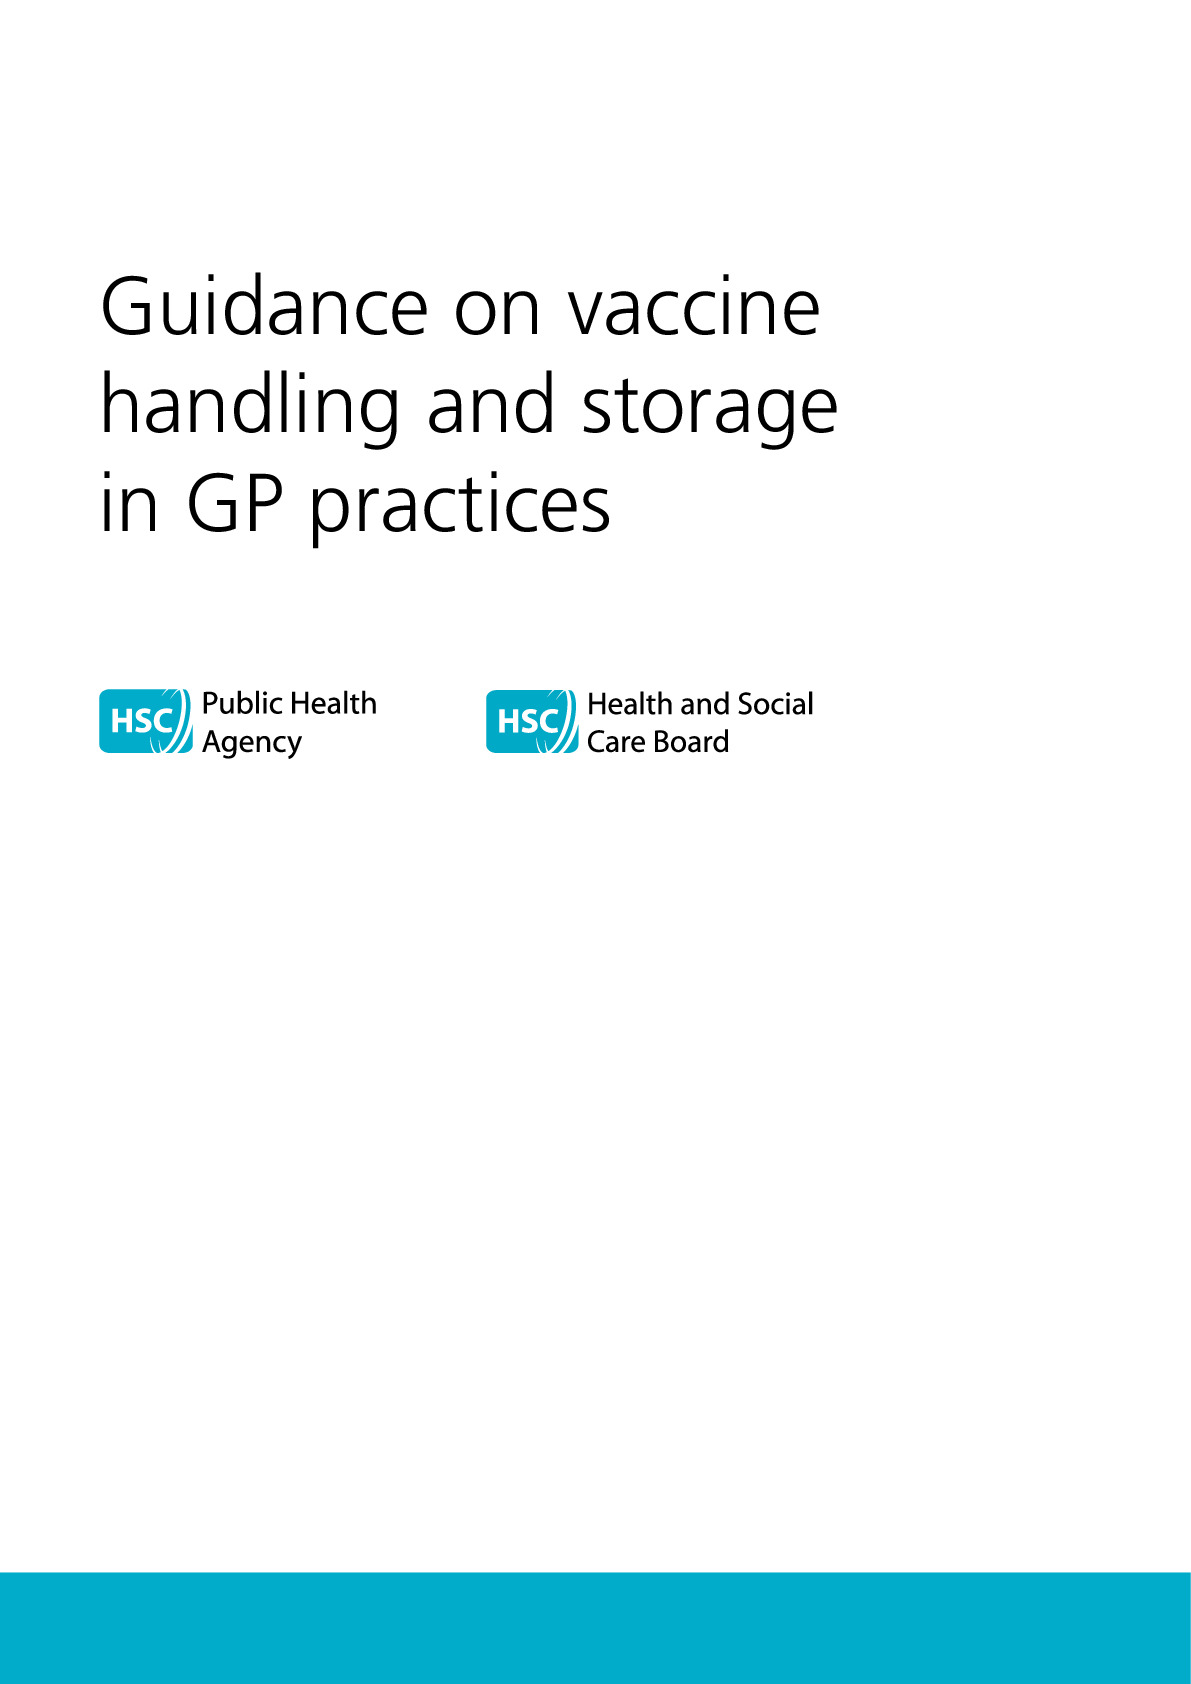 Guidance on vaccine handling and storage in GP practices 06.21 final.pdf